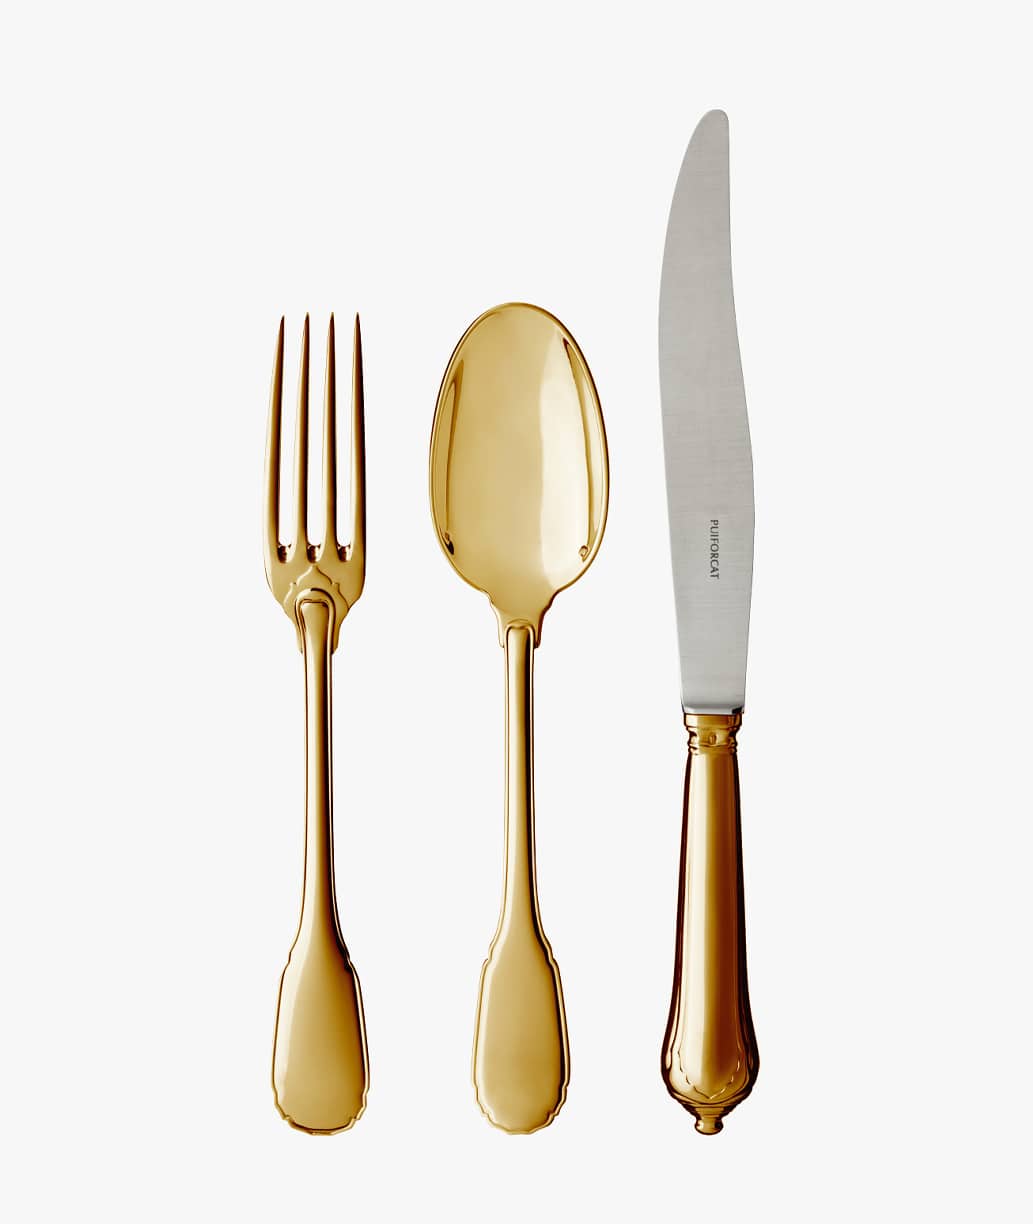 Three pieces of table cutlery in sterling silver and a gold gilt finish from Noailles collection from Puiforcat